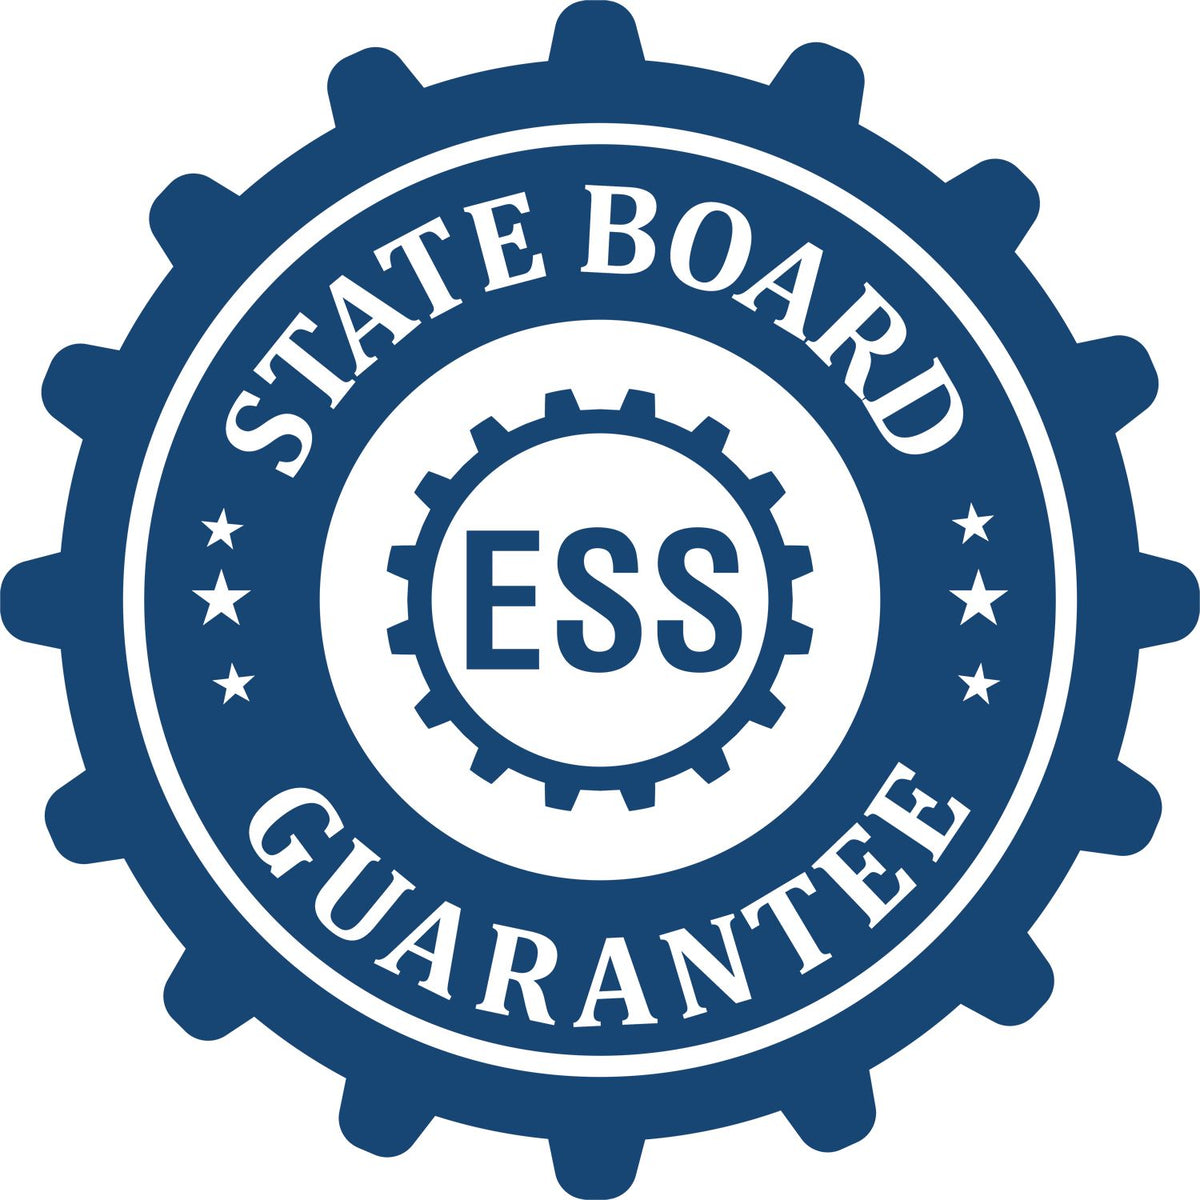 An emblem in a gear shape illustrating a state board guarantee for the Hybrid Texas Architect Seal